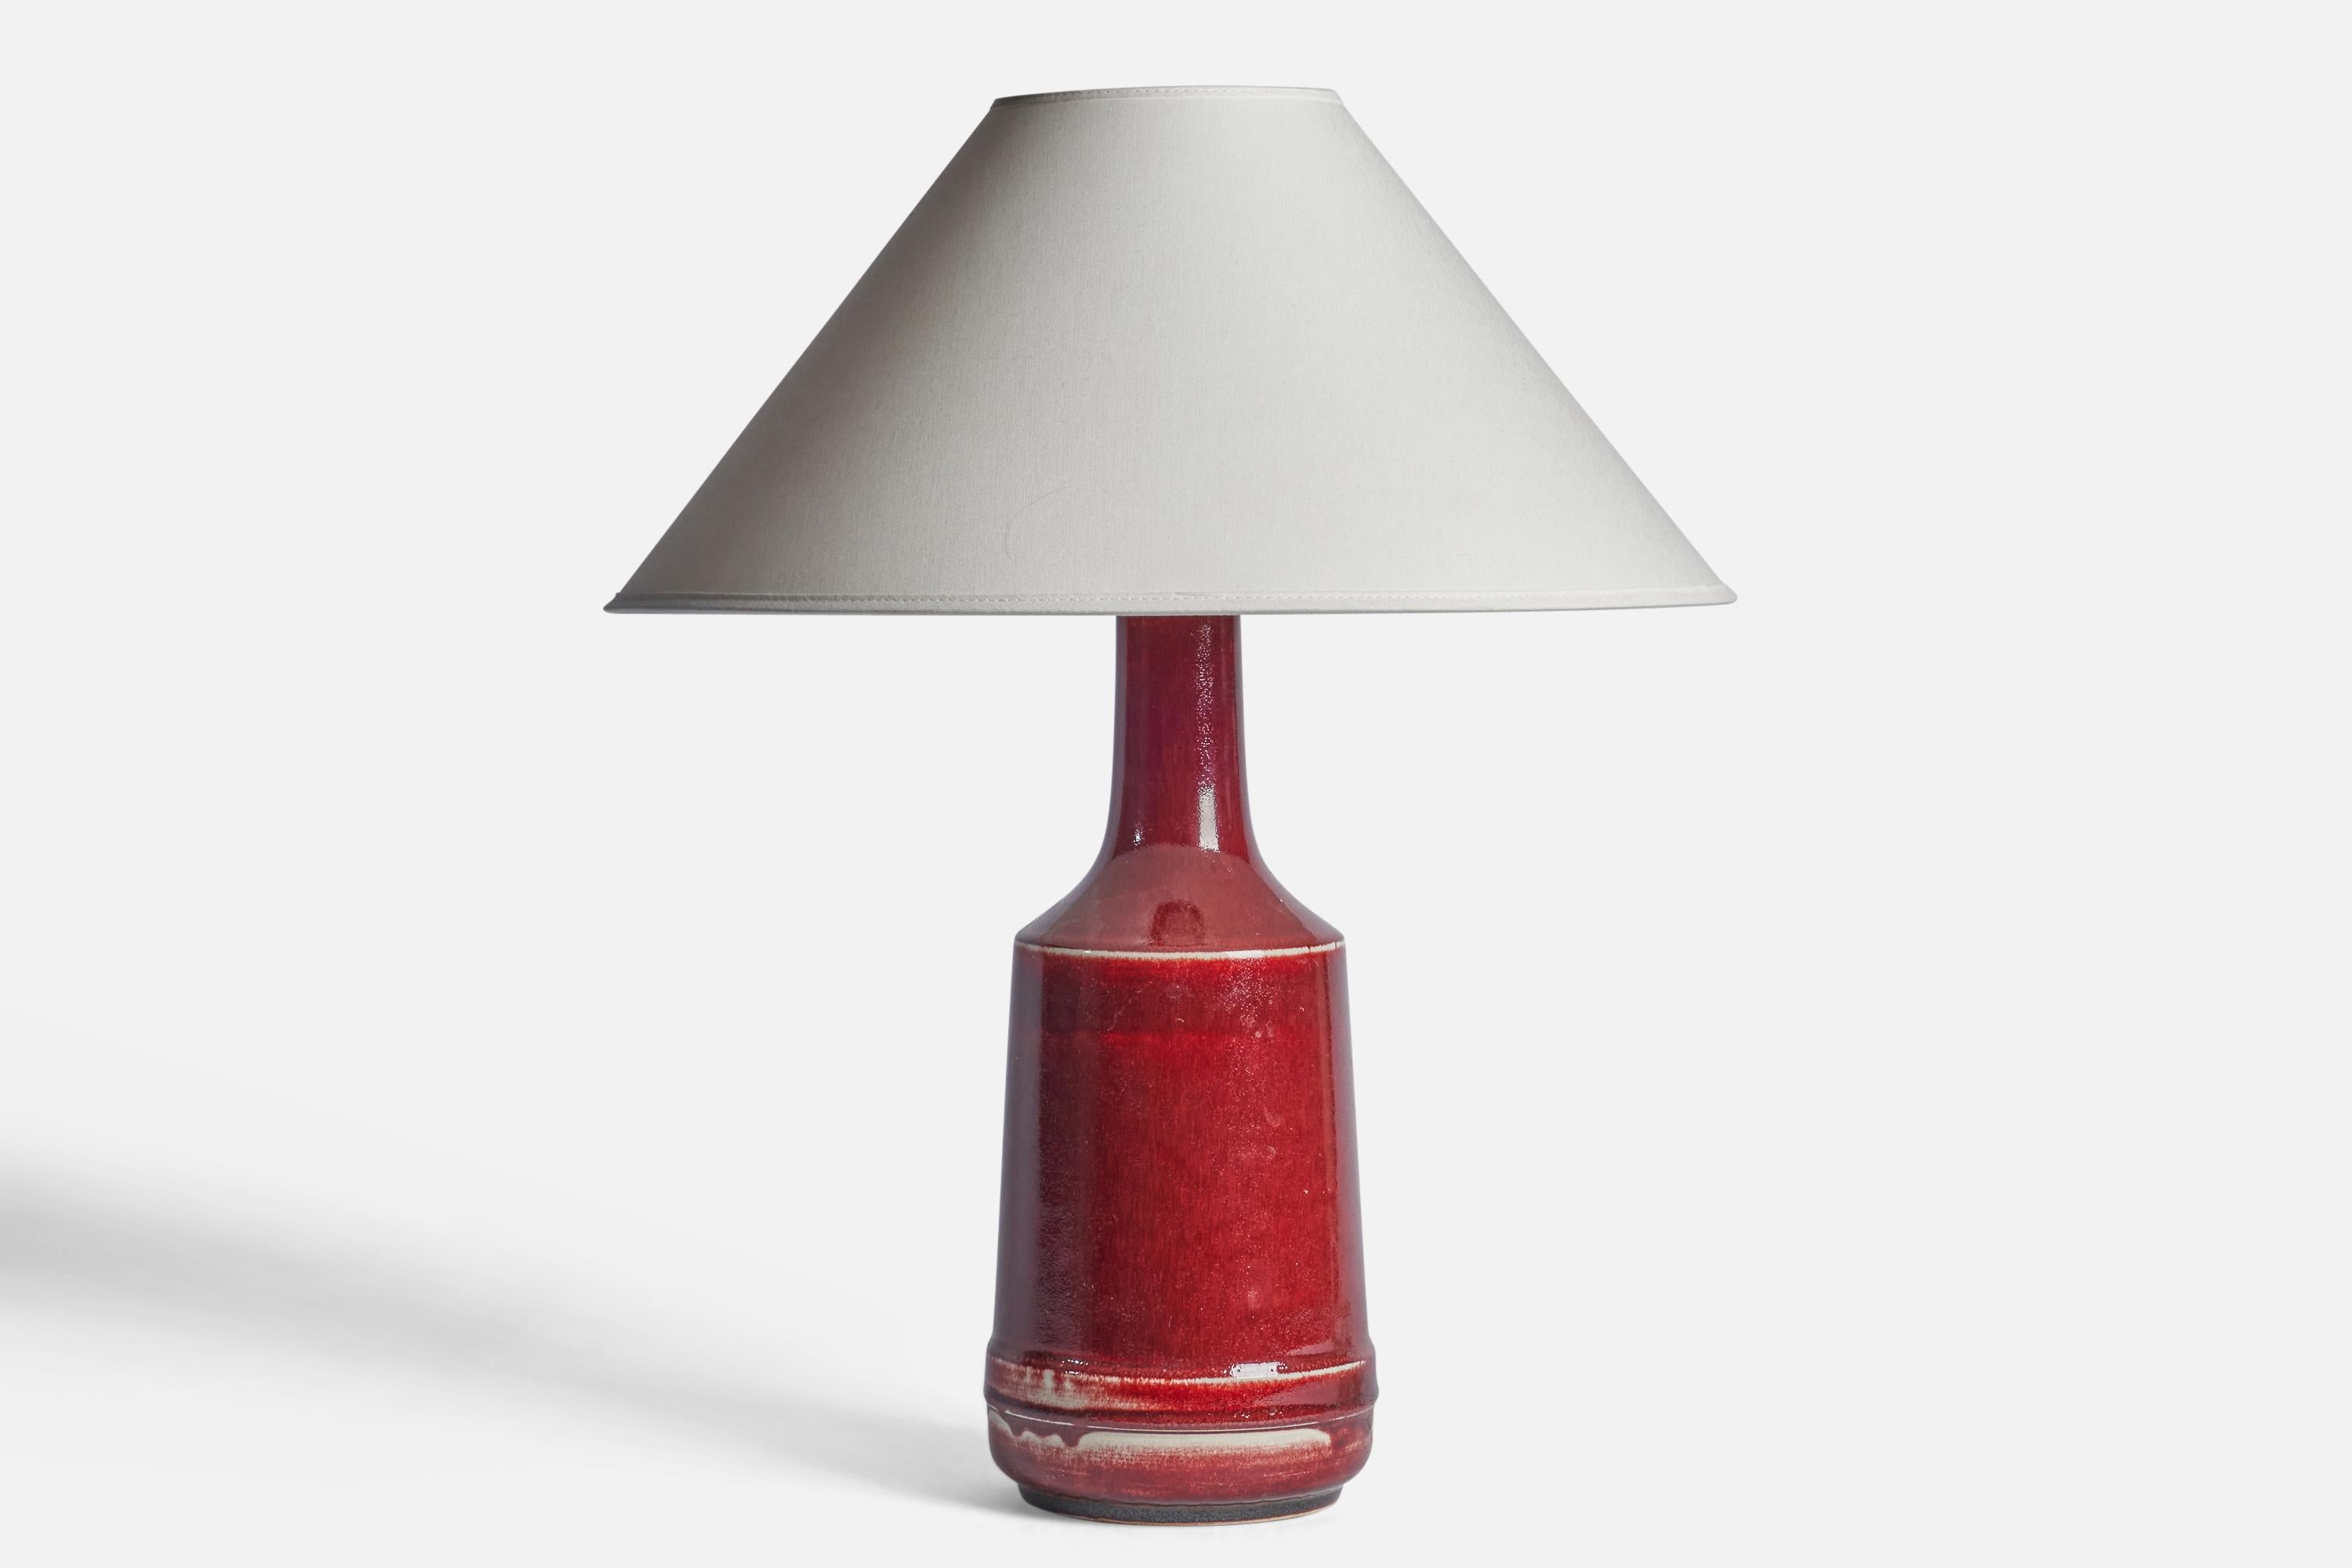 A red-glazed stoneware table lamp designed and produced by Desiree, Denmark, 1960s.

Dimensions of Lamp (inches): 15.25